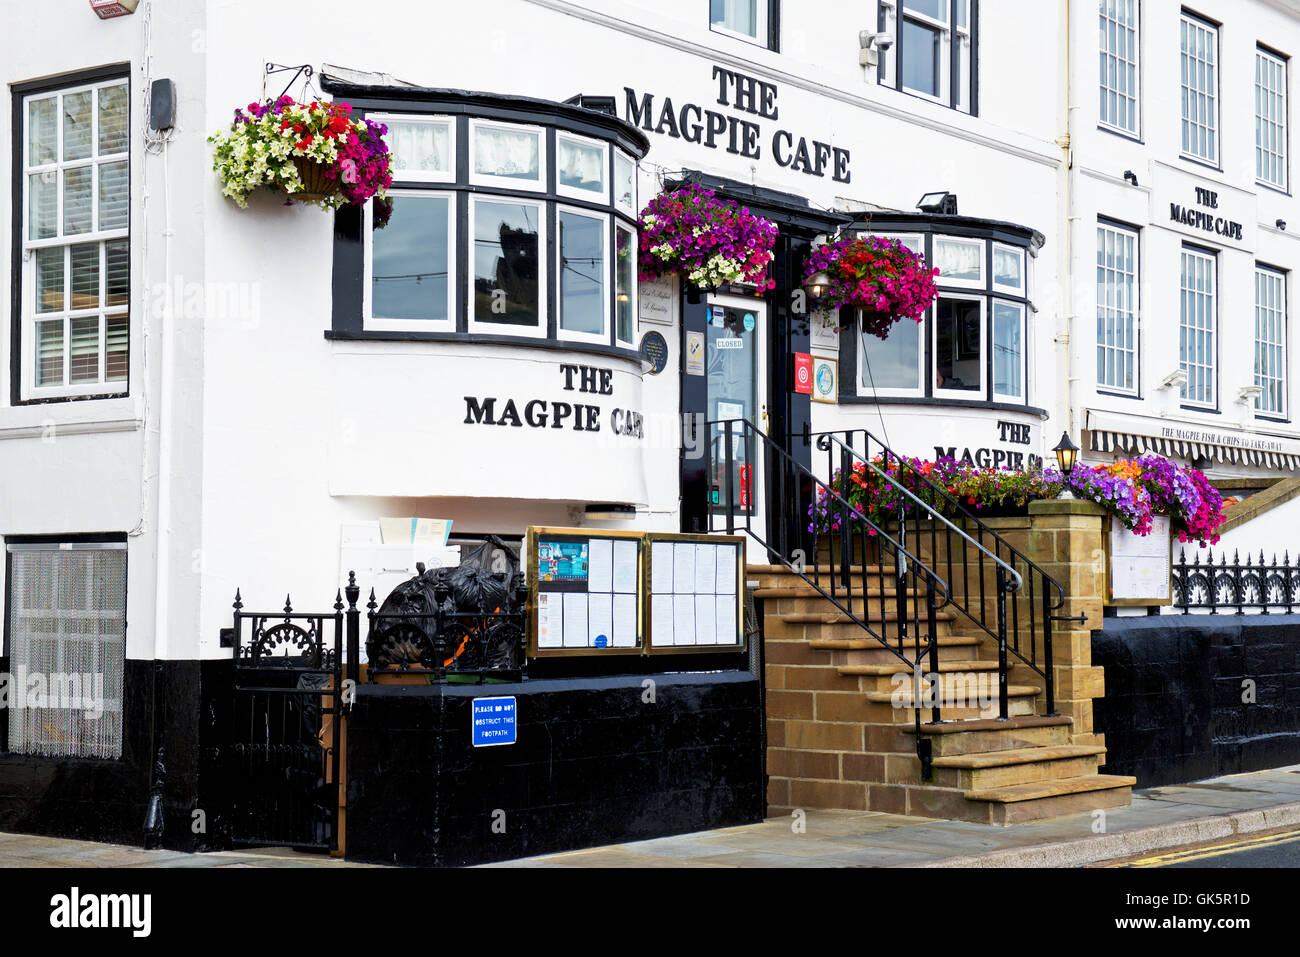 The famous Magpie Cafe, Pier Road, Whitby, North Yorkshire, England UK Stock Photo